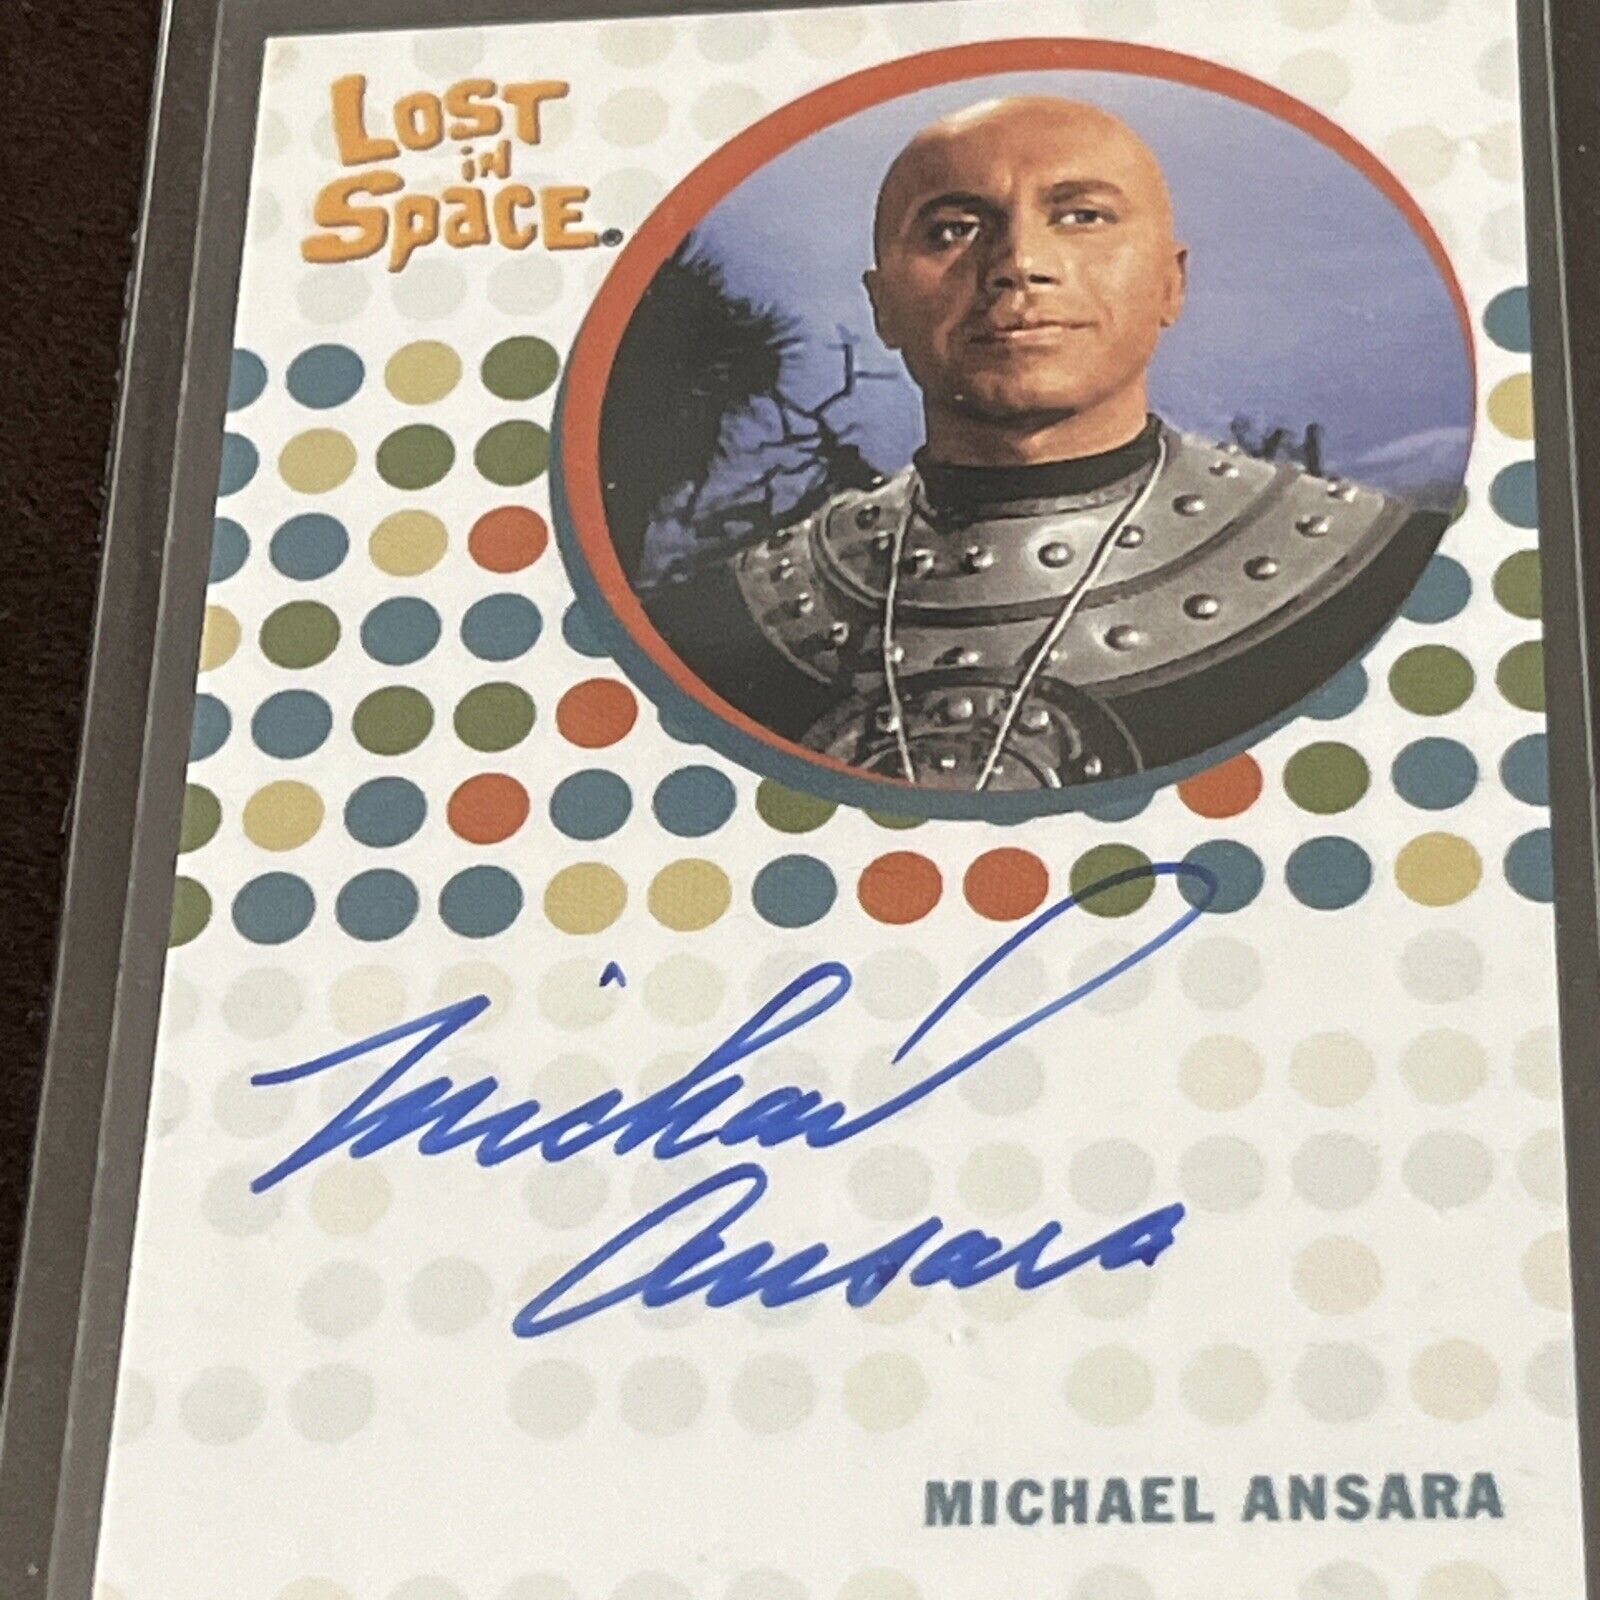 Michael Ansara as Ruler The Complete Lost in Space Autograph Card